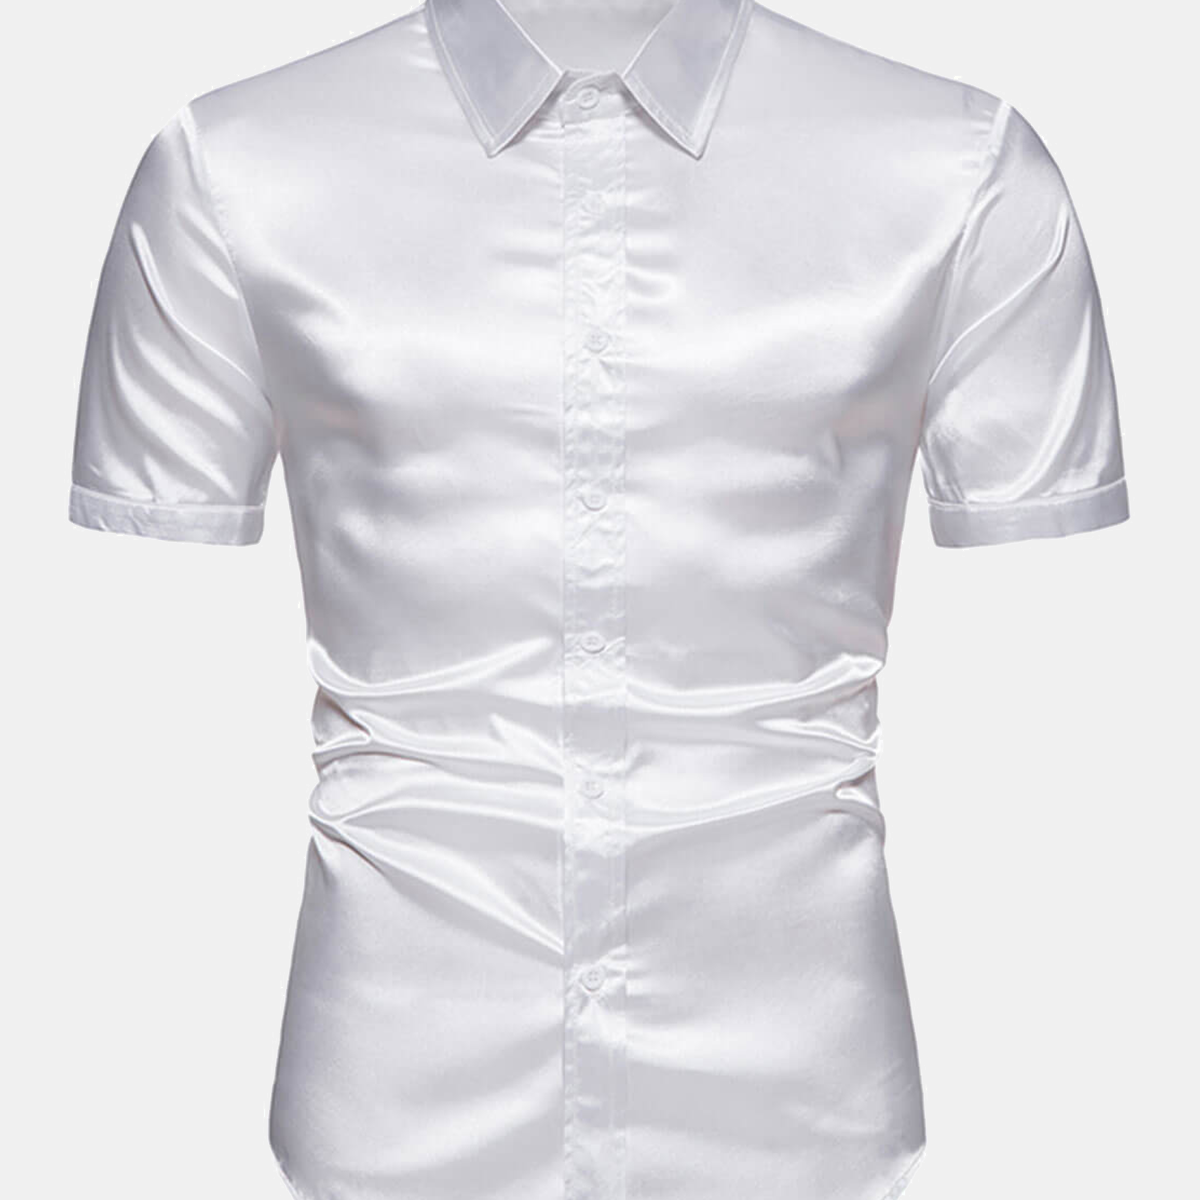 Men's Solid Color Summer Party Short Sleeve Shirt